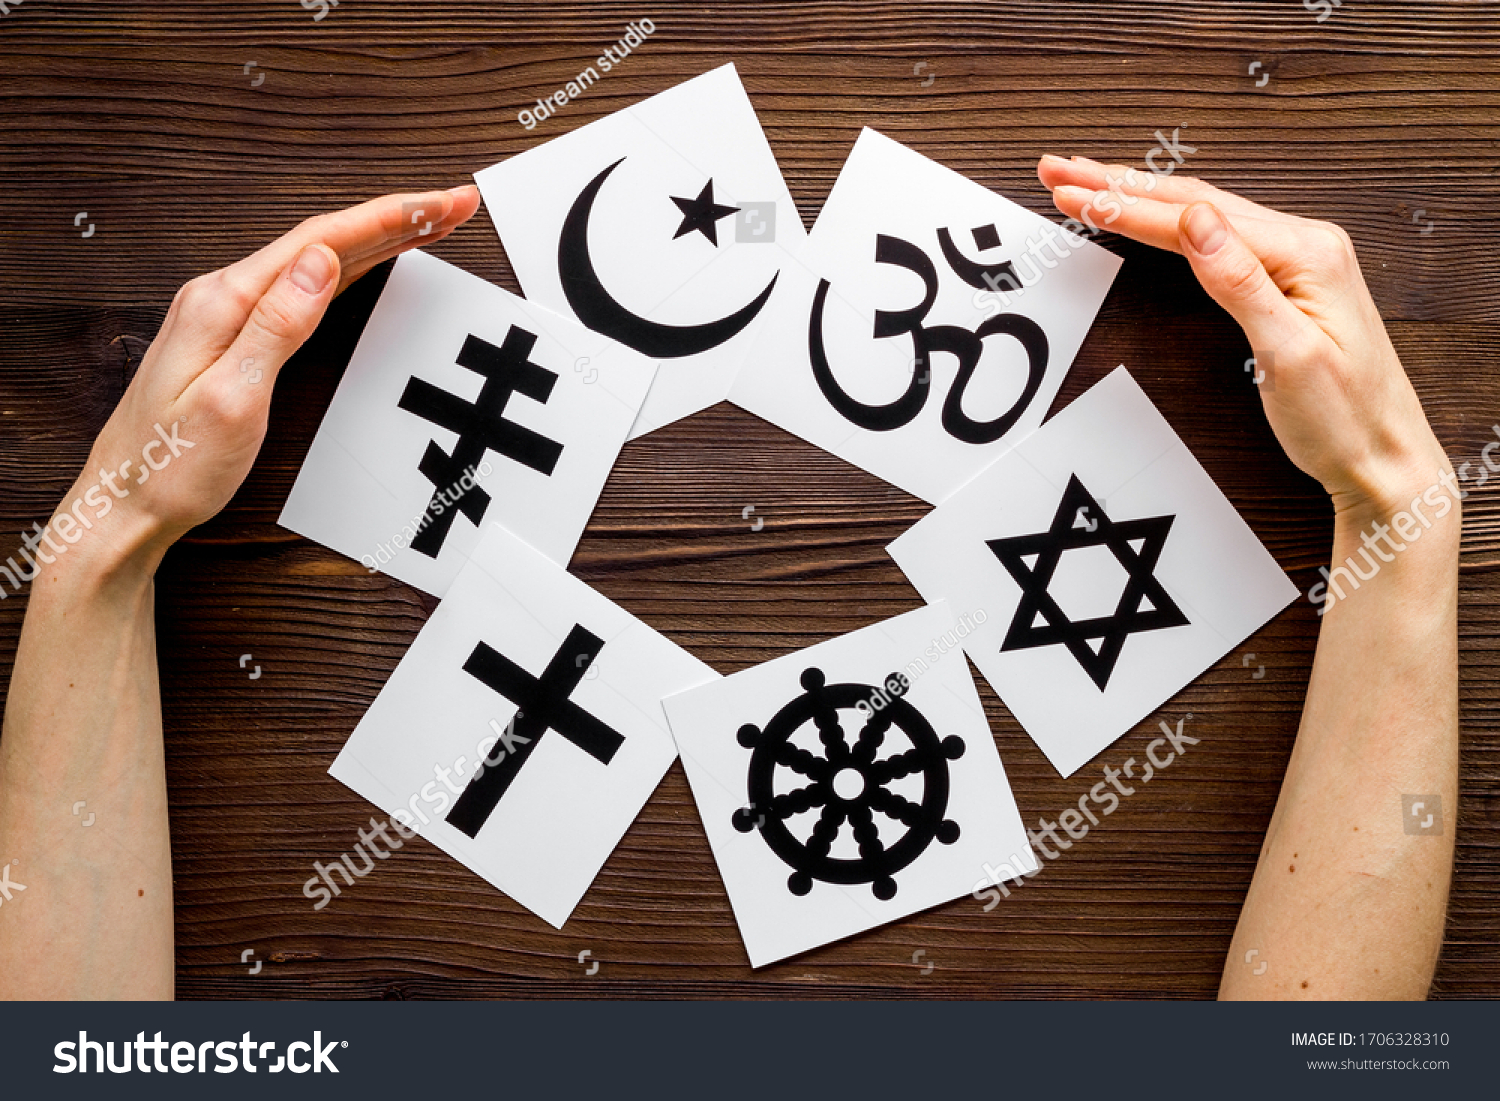 World religions concept. Hands hugs Christianity, Catholicism, Buddhism, Judaism, Islam symbols on wooden background top view #1706328310